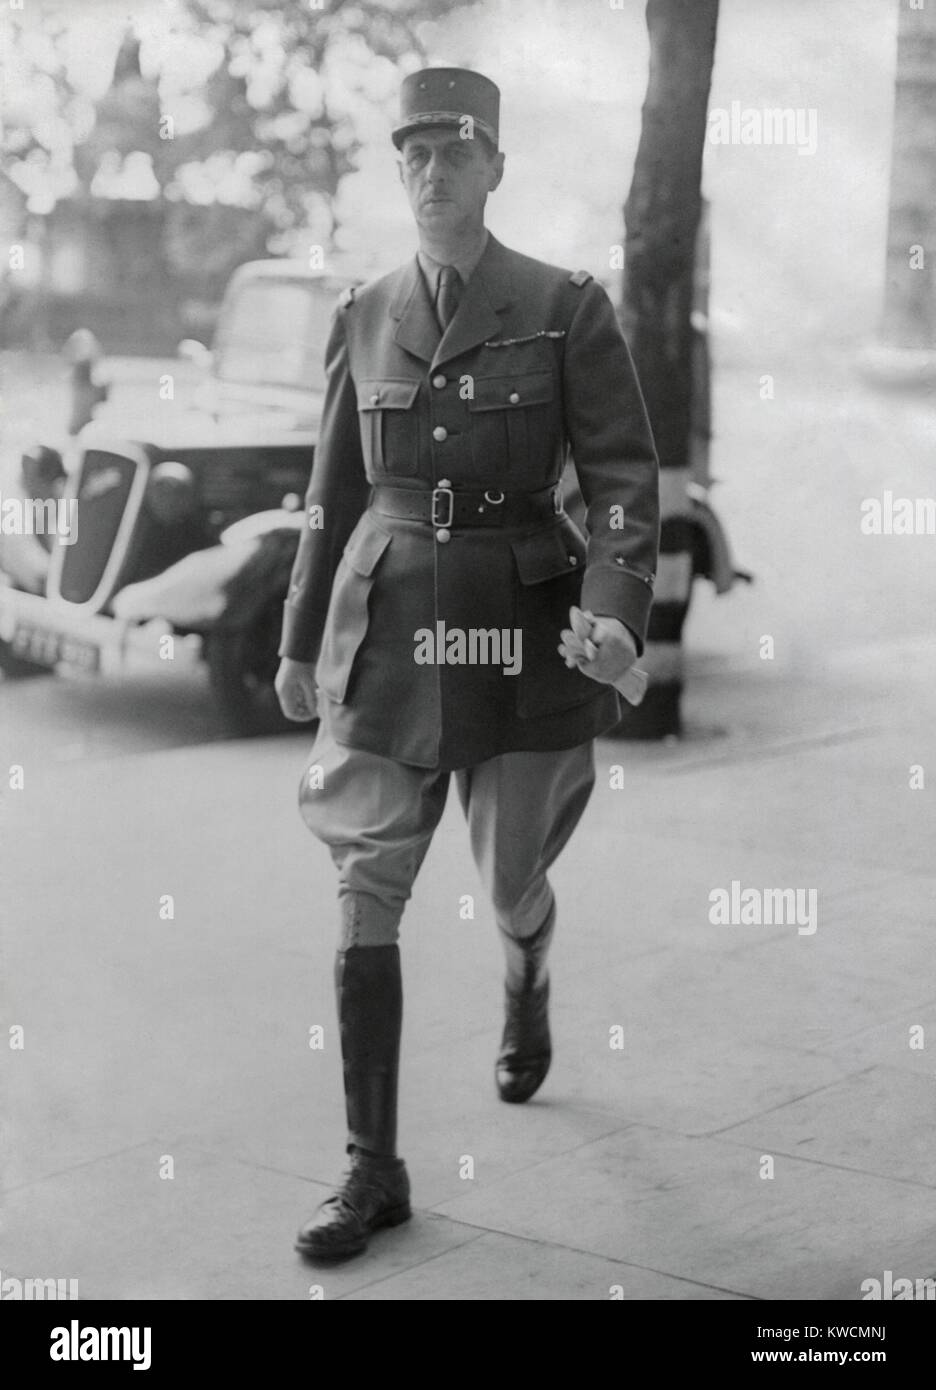 General de Gaulle in London, arriving at his office in London. June 25, 1940. He was under Secretary for War in the Reynaud Cabinet and organized French Resistance from Britain during World War 2. - (BSLOC 2014 15 234) Stock Photo